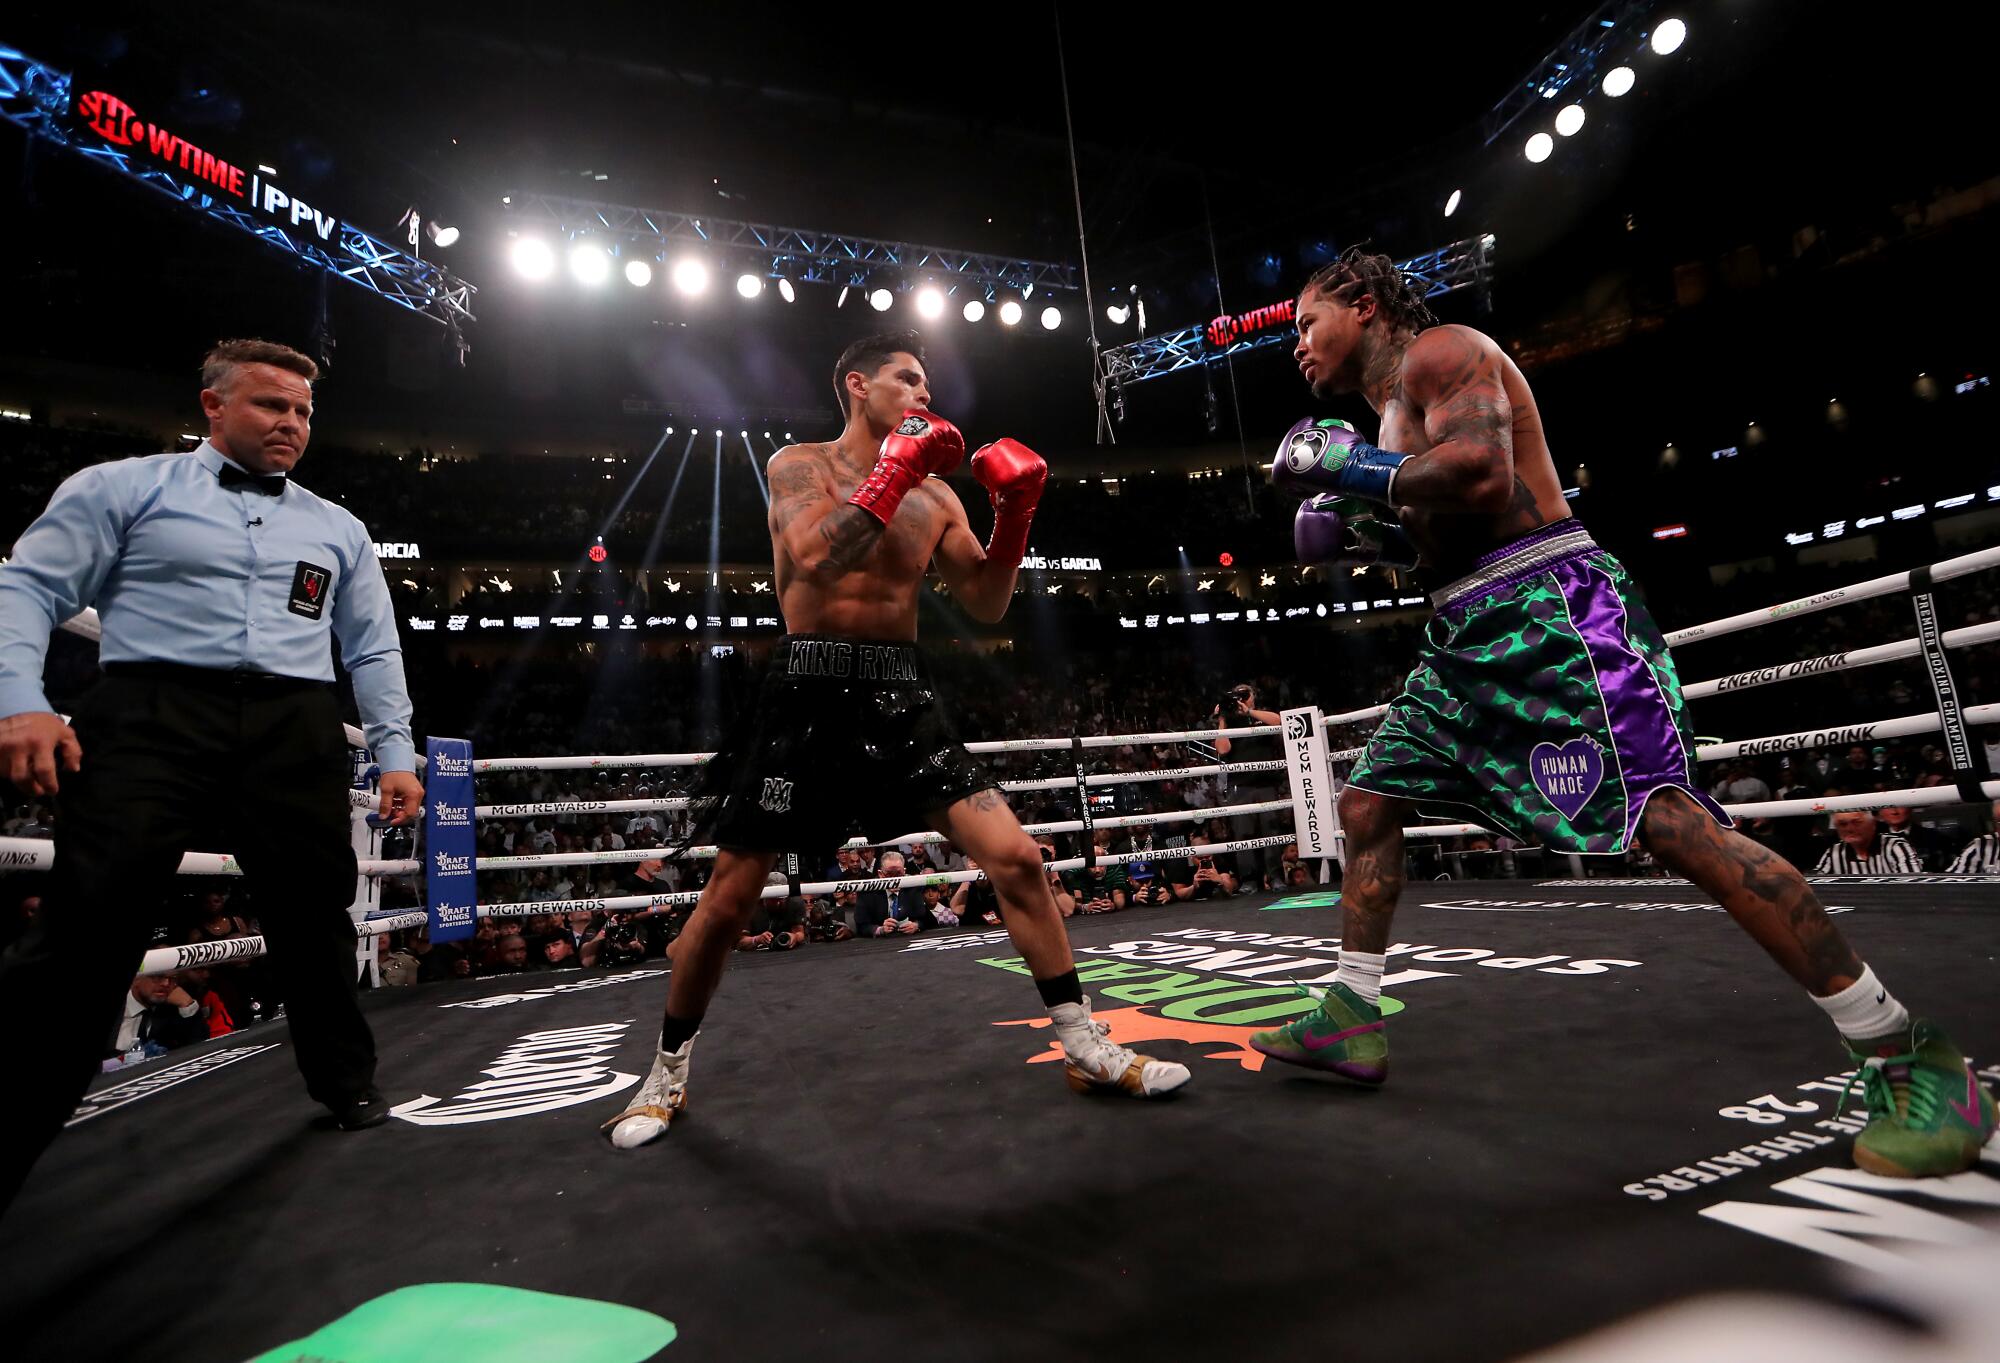 Ryan Garcia and Gervonta Davis square off in the center of the ring 